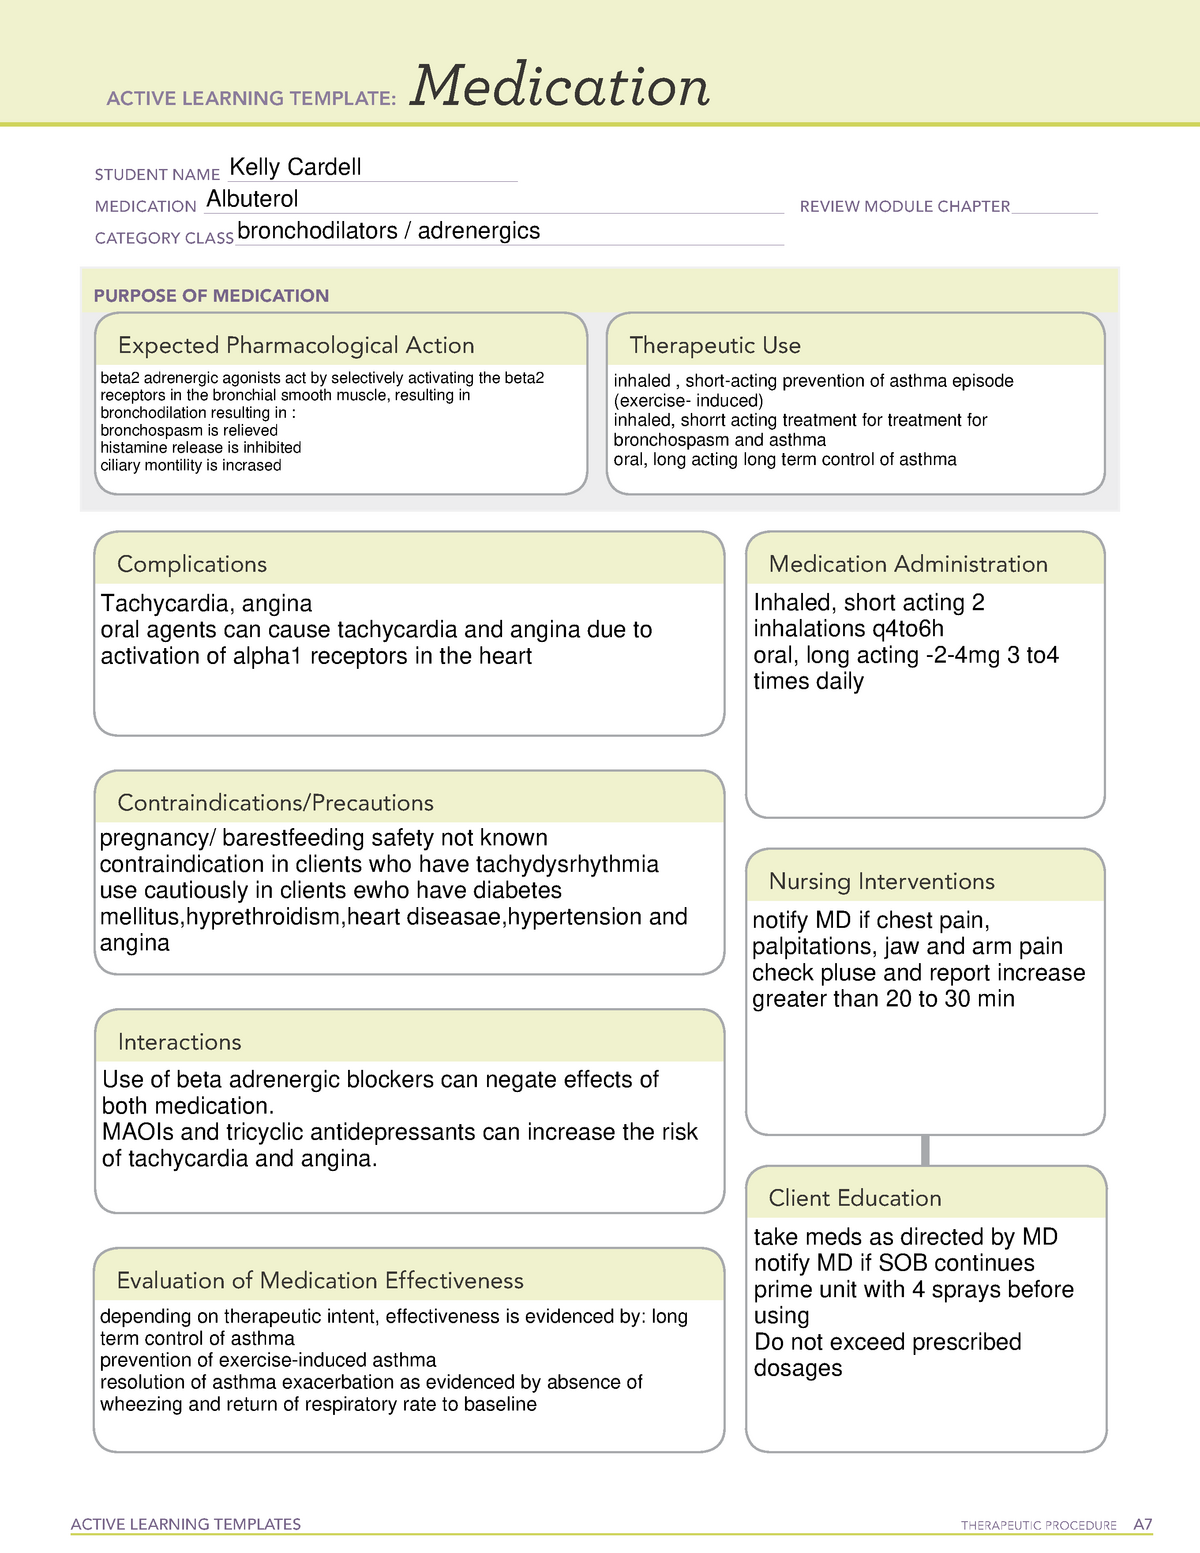 Active Learning Template Albuterol ACTIVE LEARNING TEMPLATES